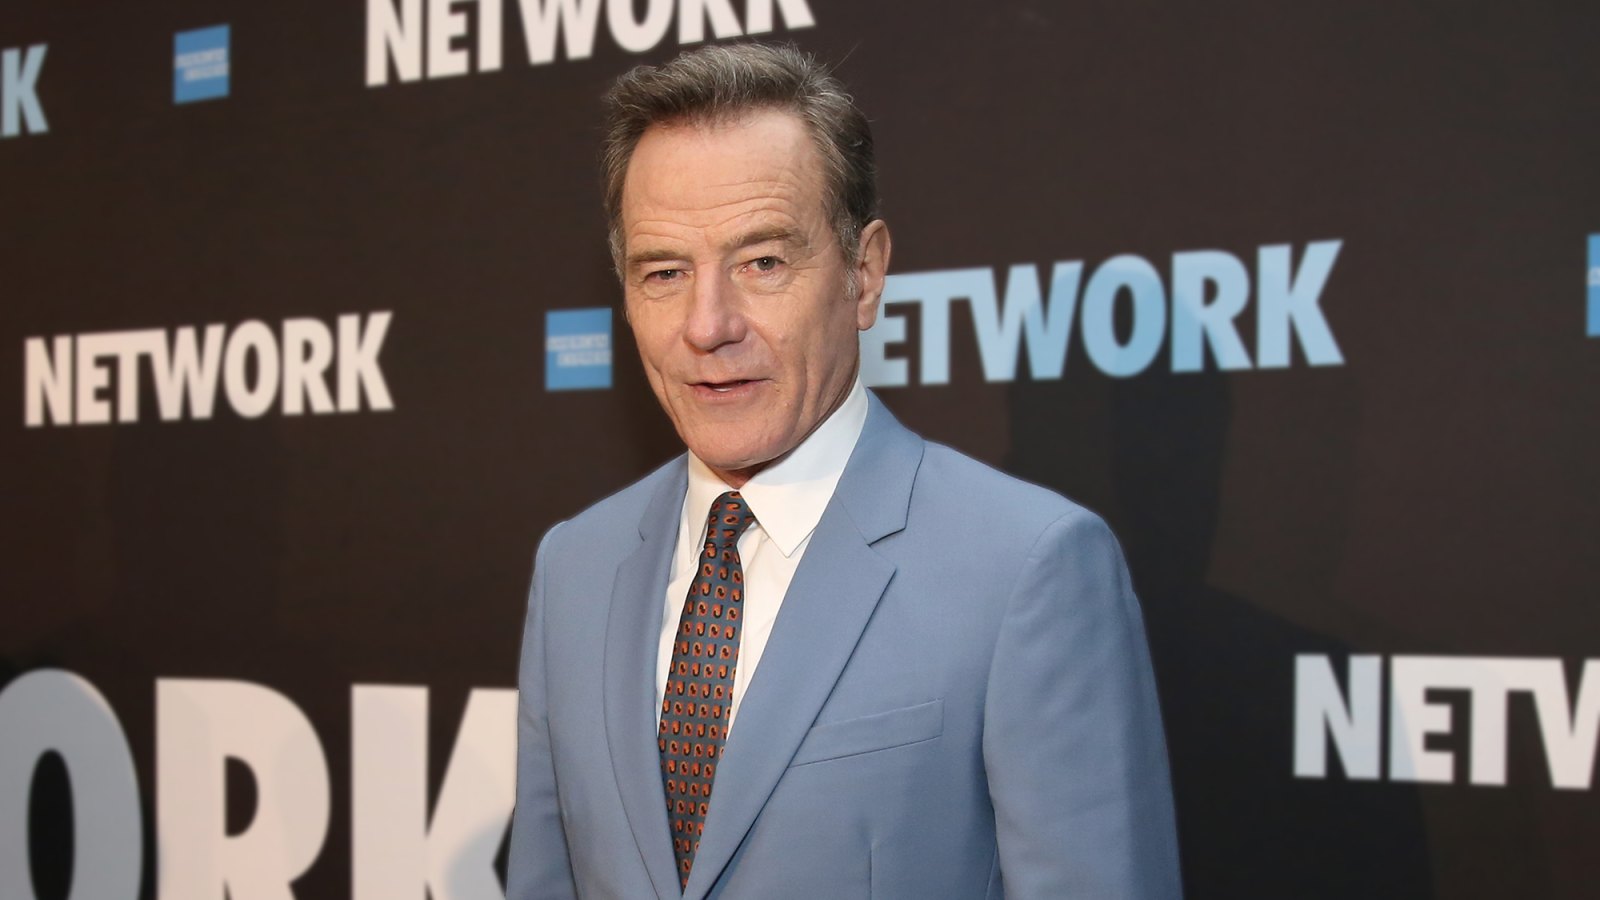 Bryan Cranston Defends Playing a Disabled Man in ‘The Upside,’ Says It Was a ‘Business Decision’